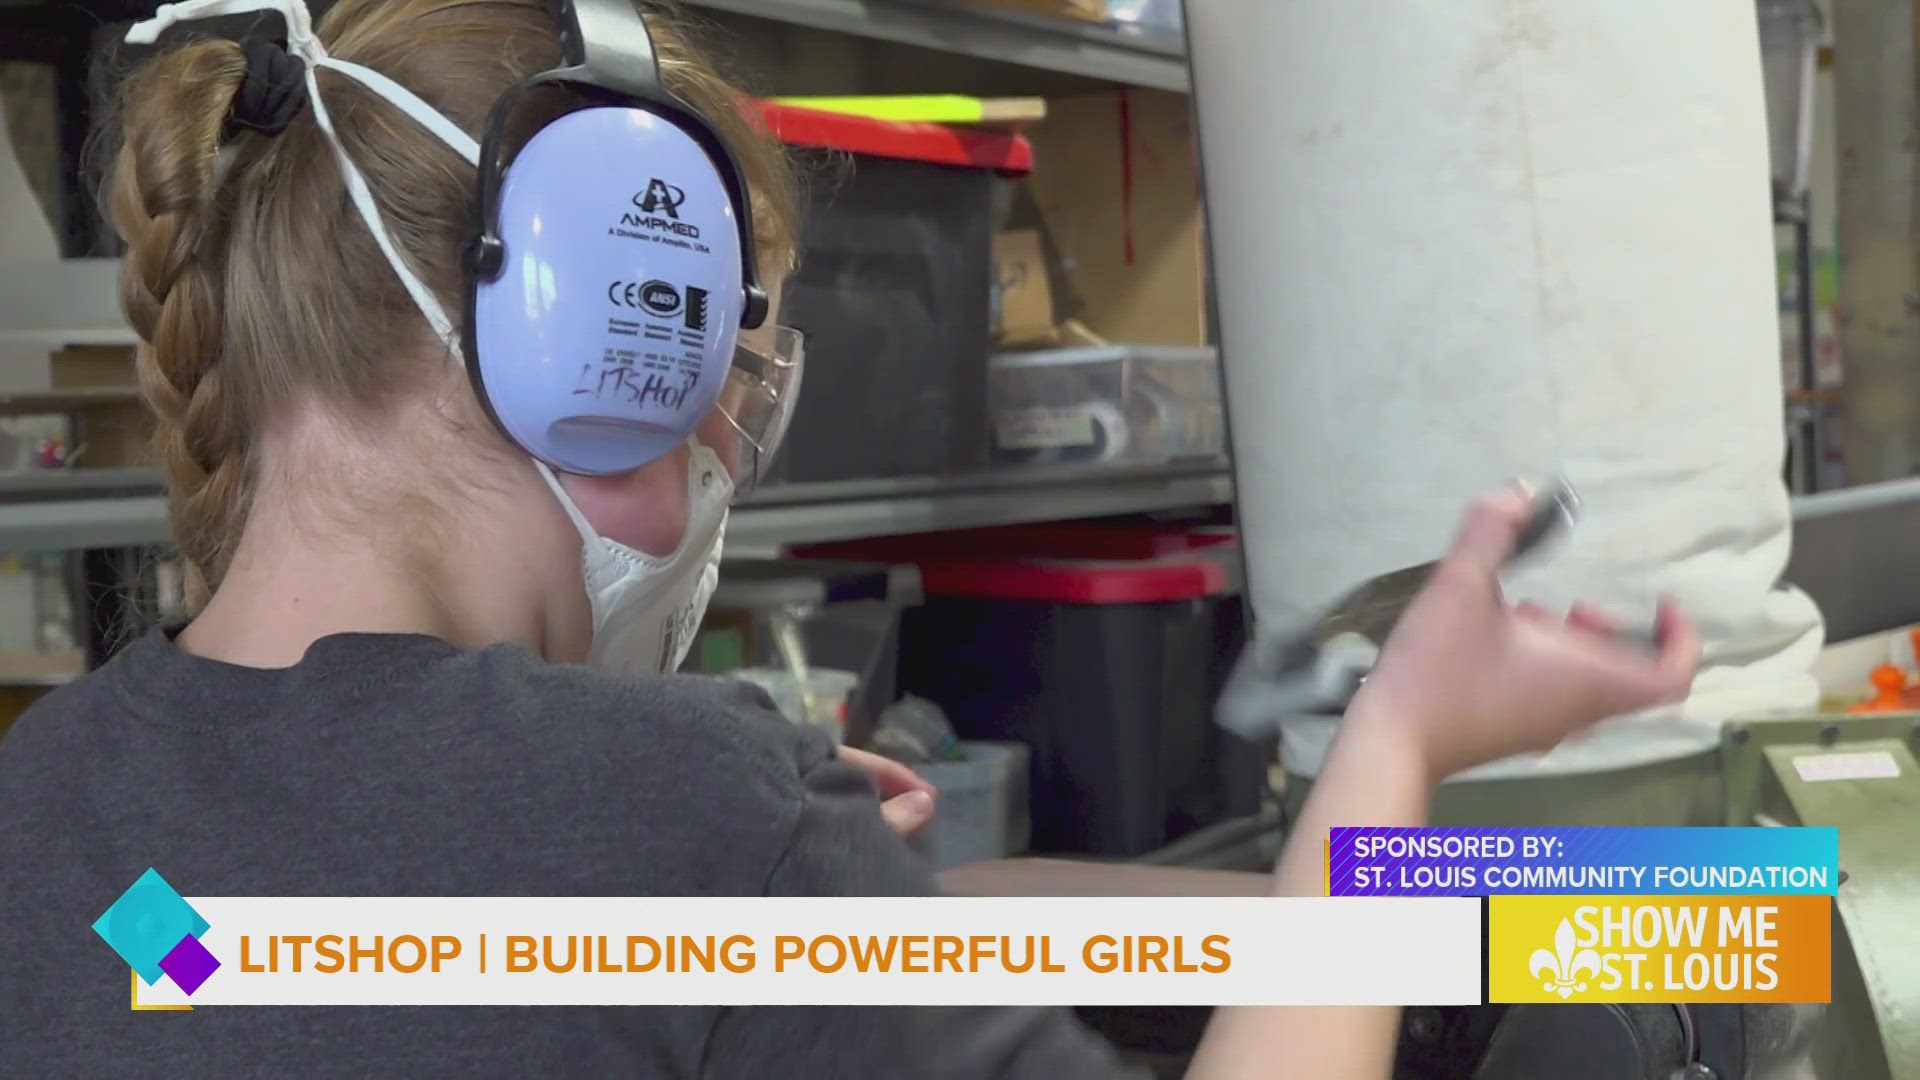 You can help in the mission of building powerful girls by supporting LitShop for Give STL Day on May 9.